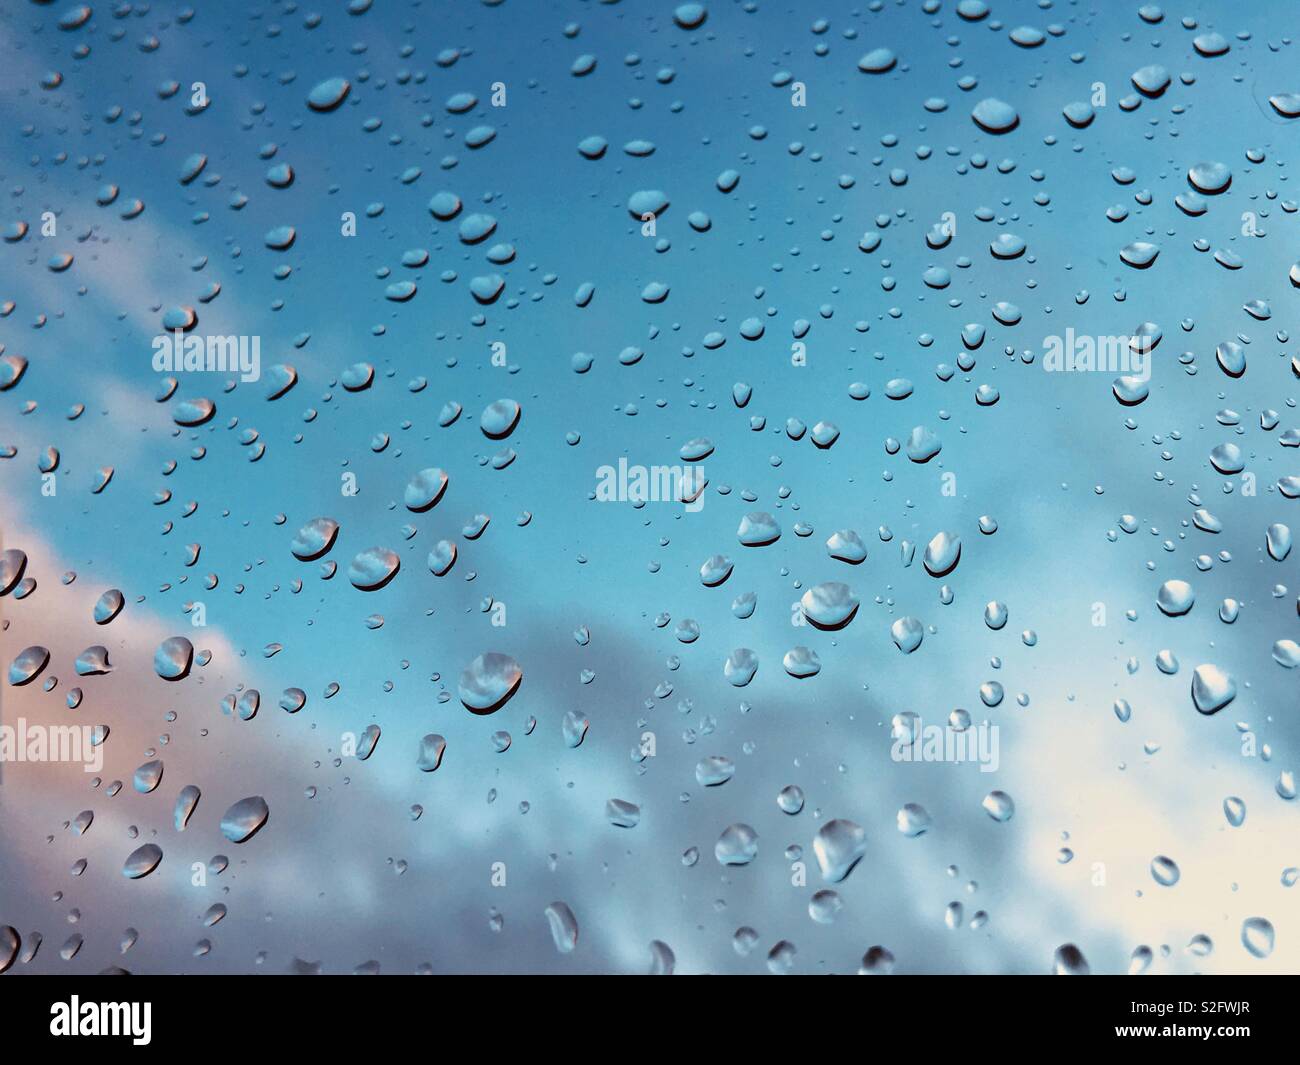 Raindrops on window pane with blue sky in background Stock Photo - Alamy